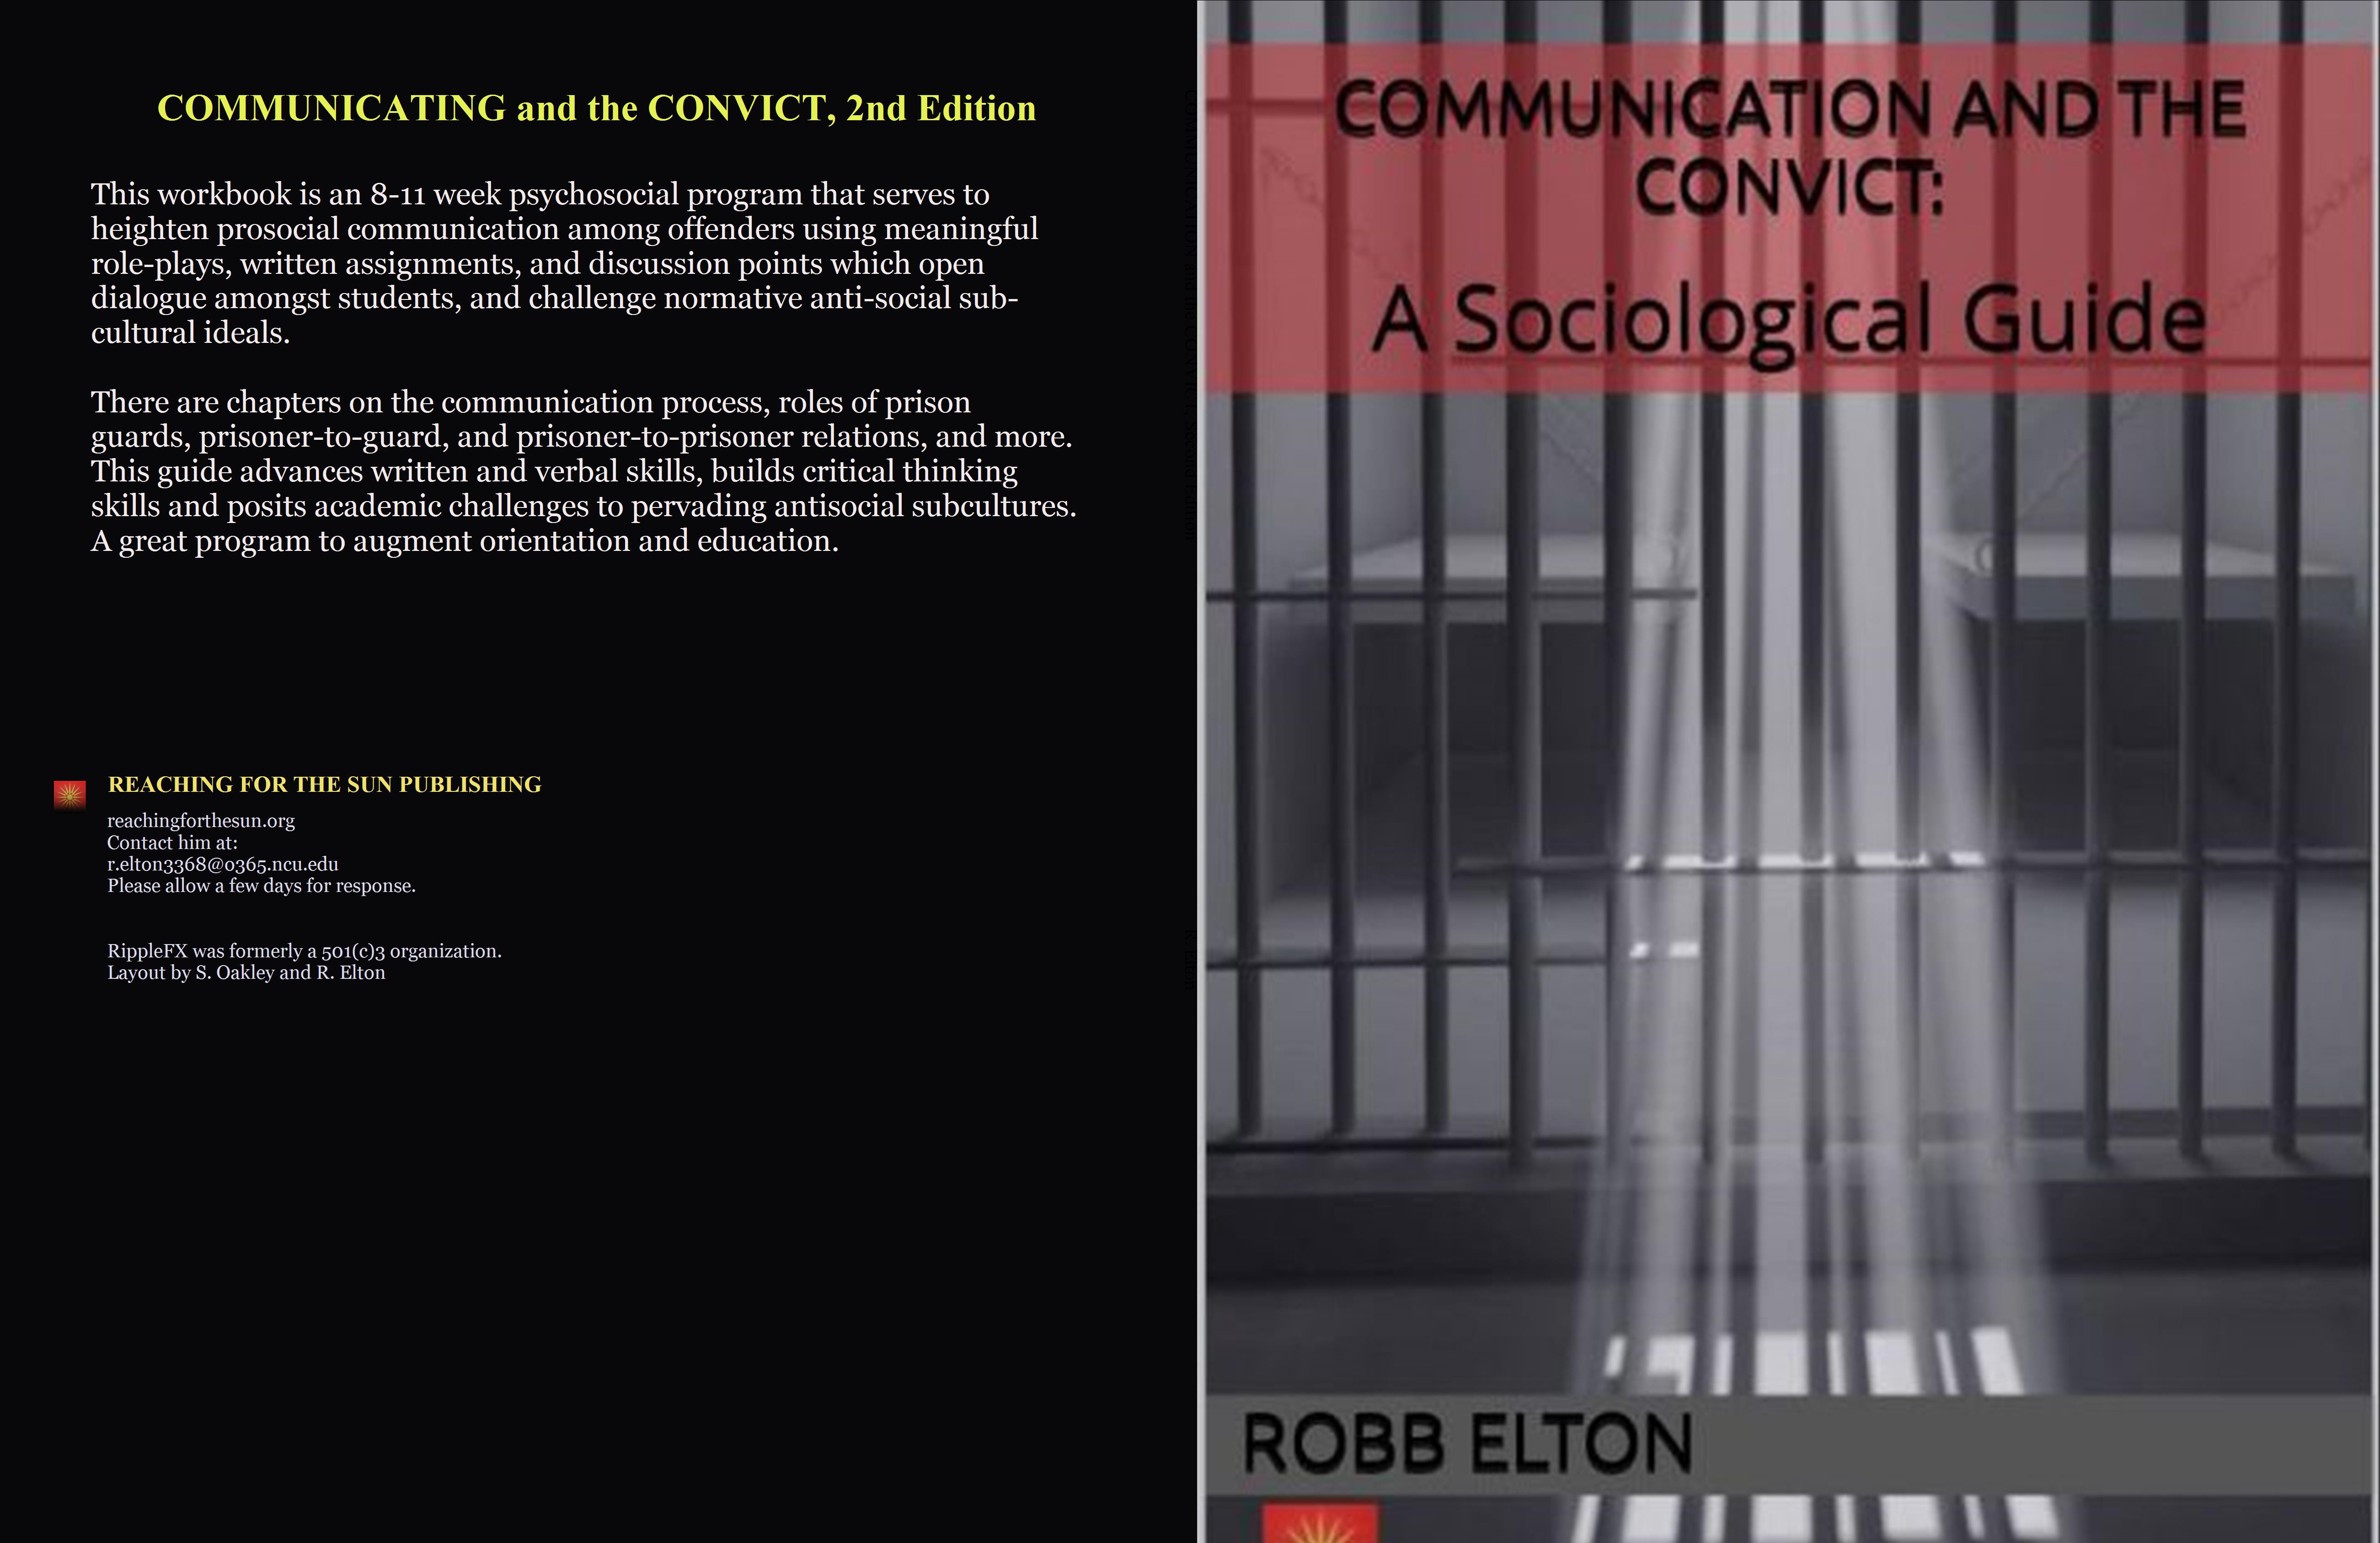 COMMUNICATION and the CONVICT Second Edition cover image